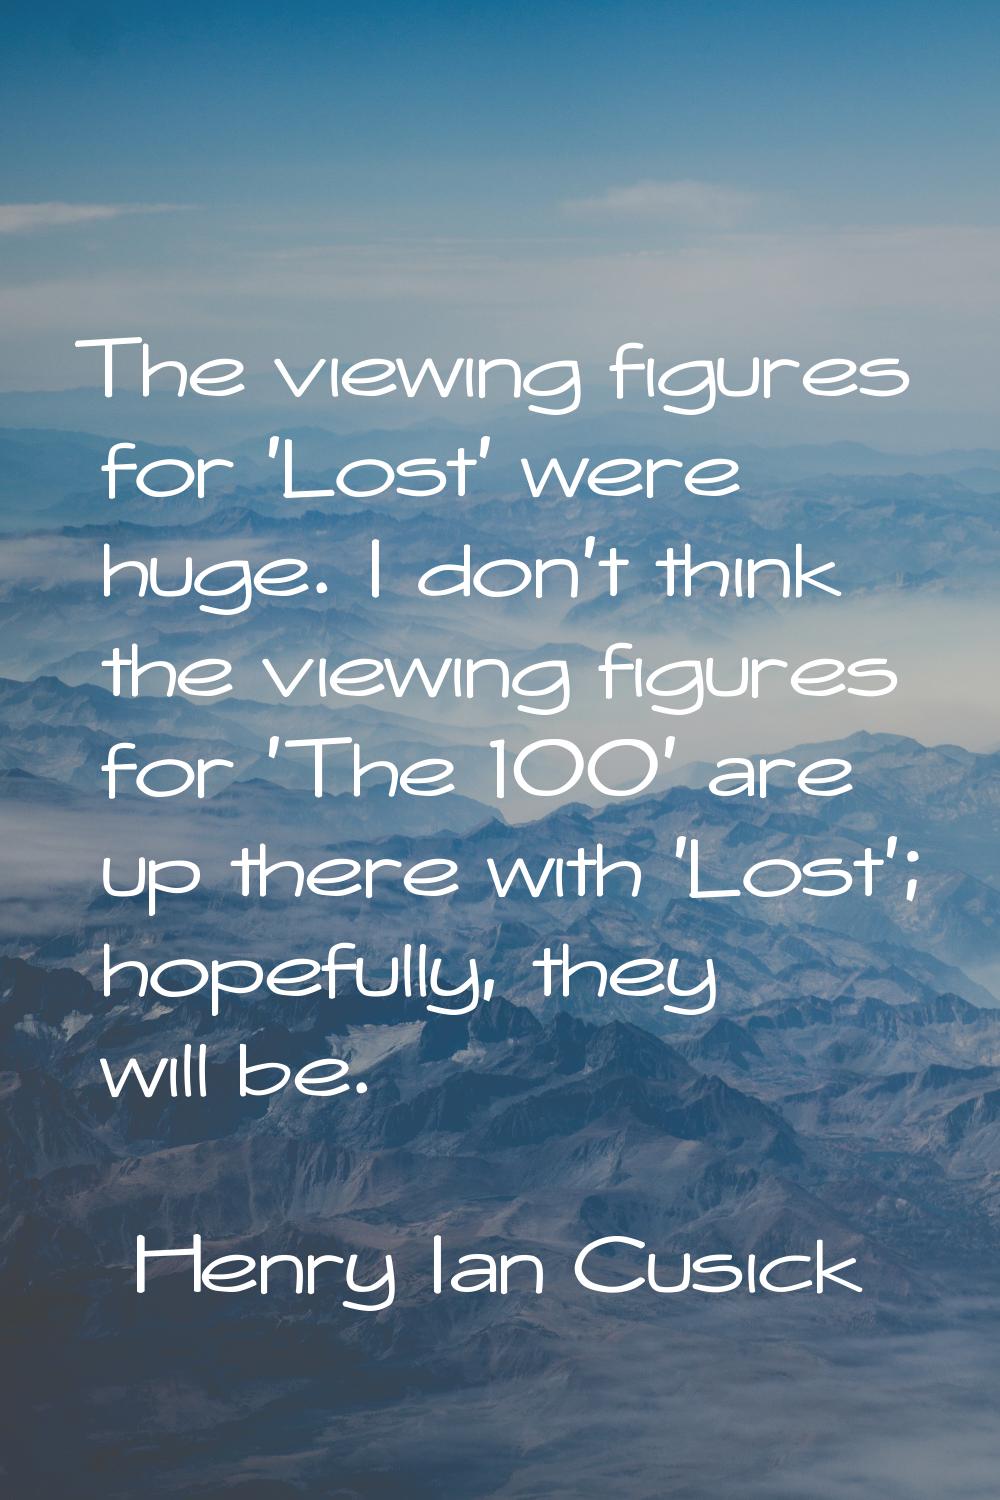 The viewing figures for 'Lost' were huge. I don't think the viewing figures for 'The 100' are up th